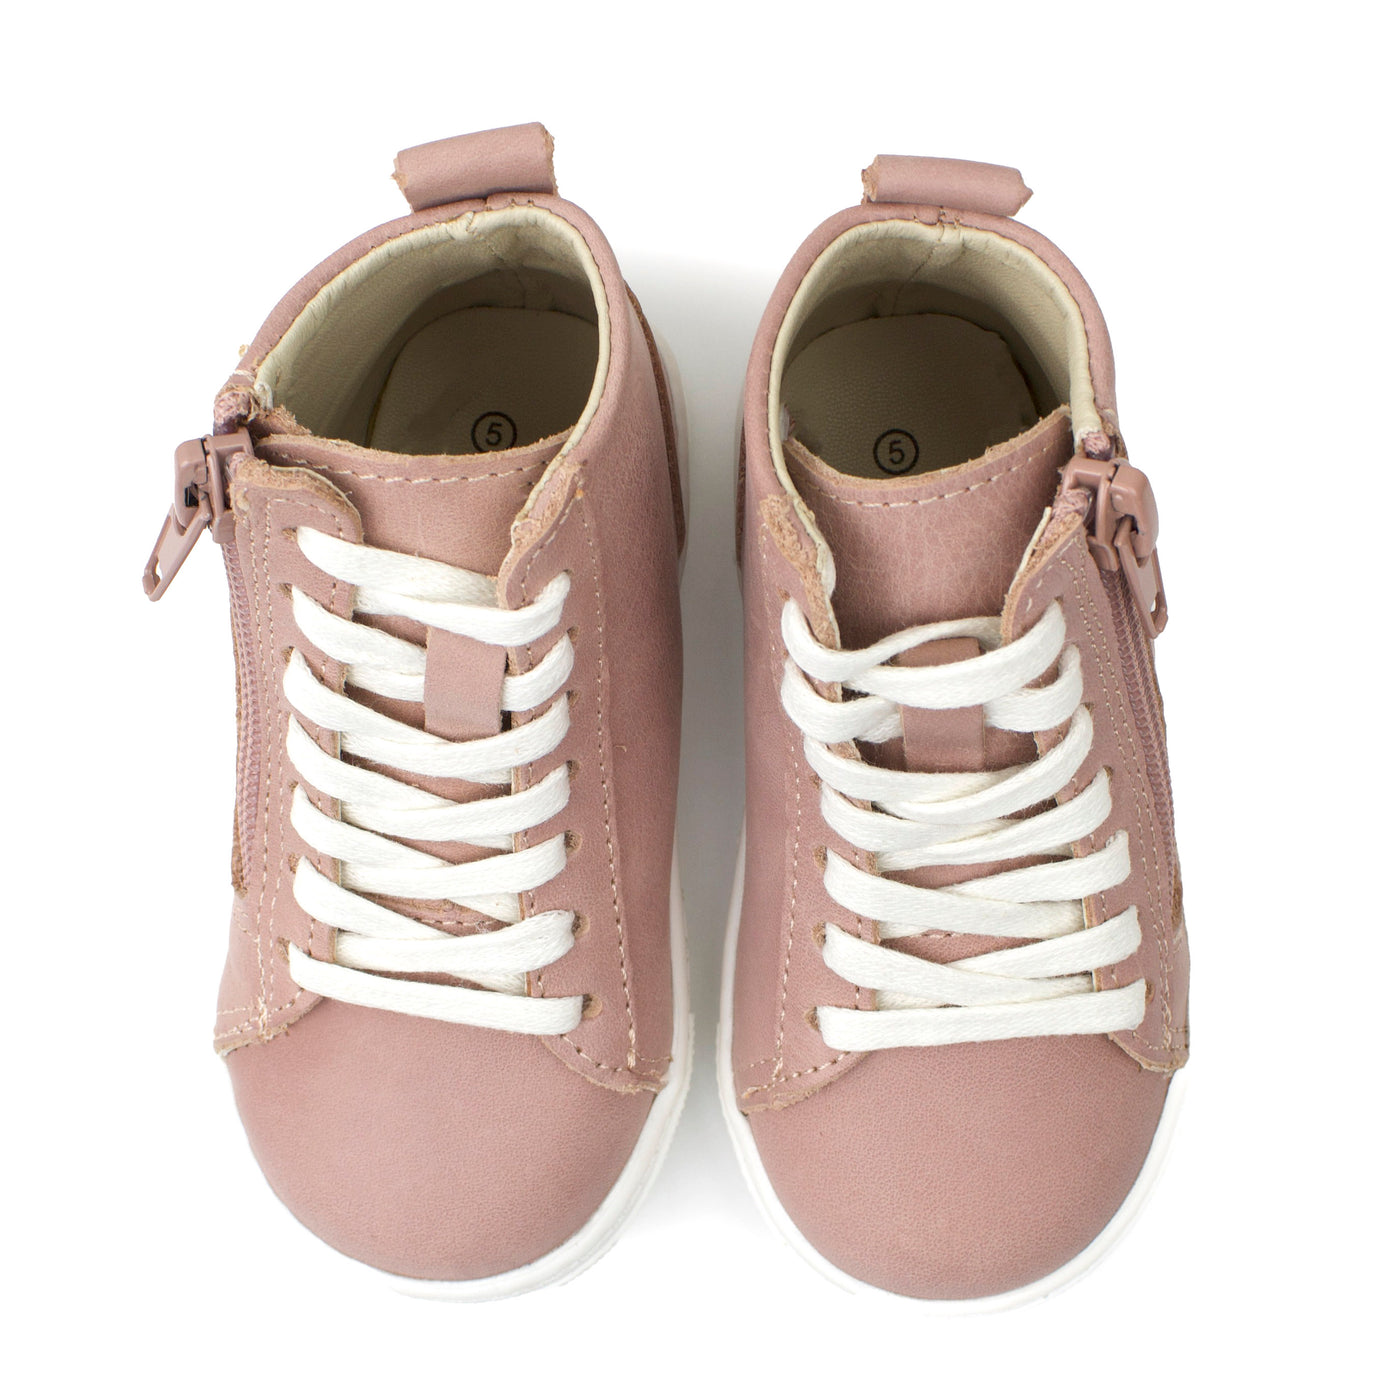 Blush - High Top 2.0 Sneakers